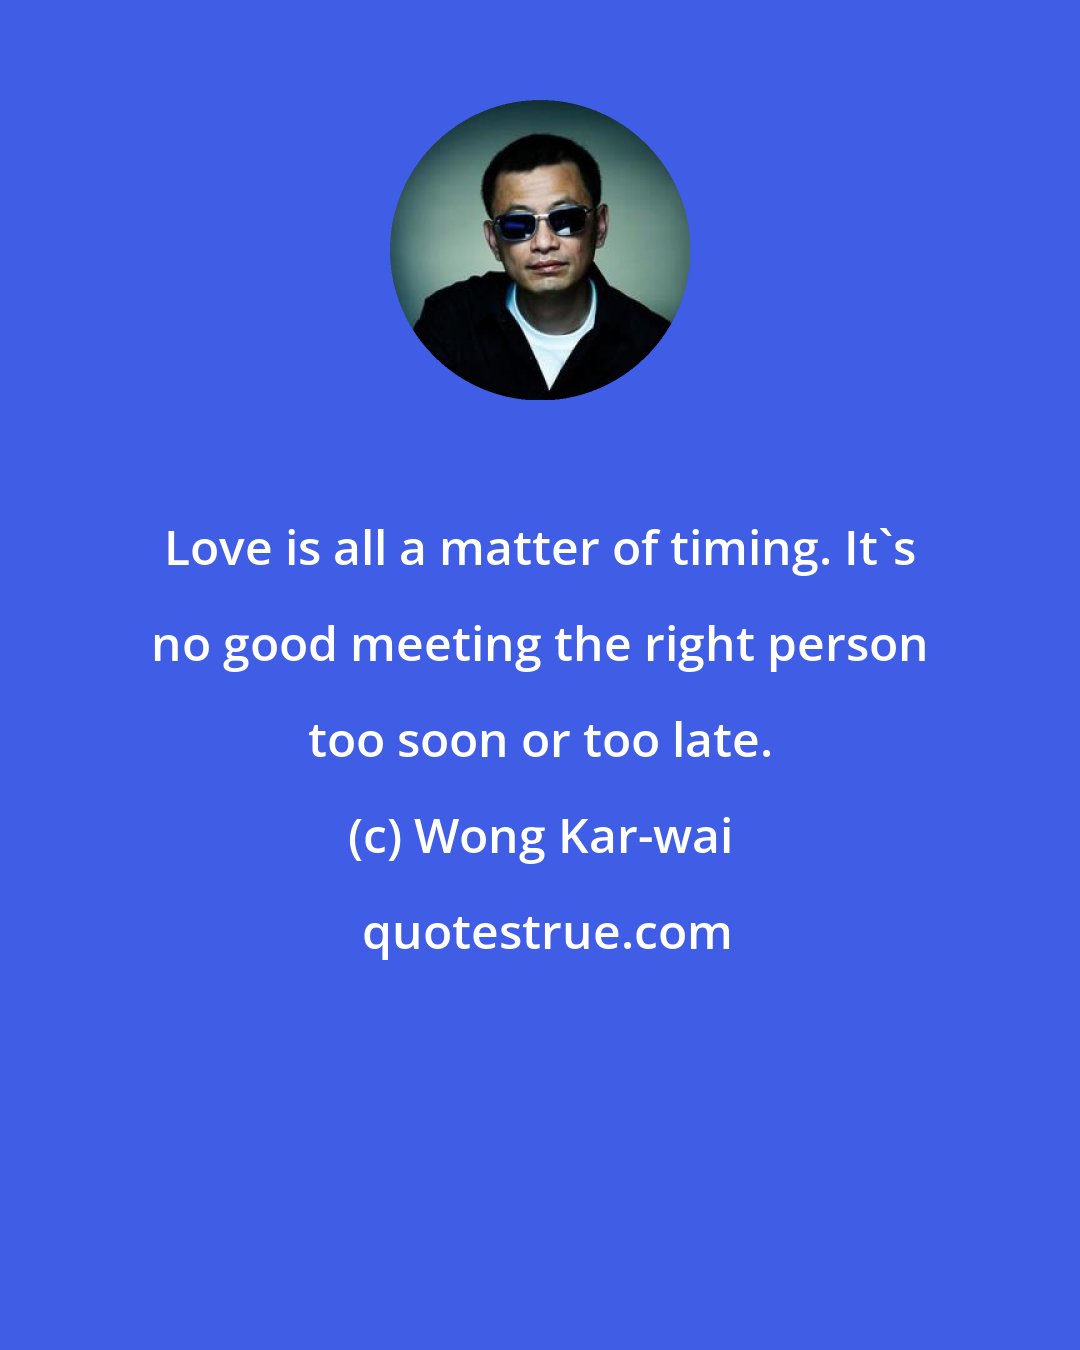 Wong Kar-wai: Love is all a matter of timing. It's no good meeting the right person too soon or too late.